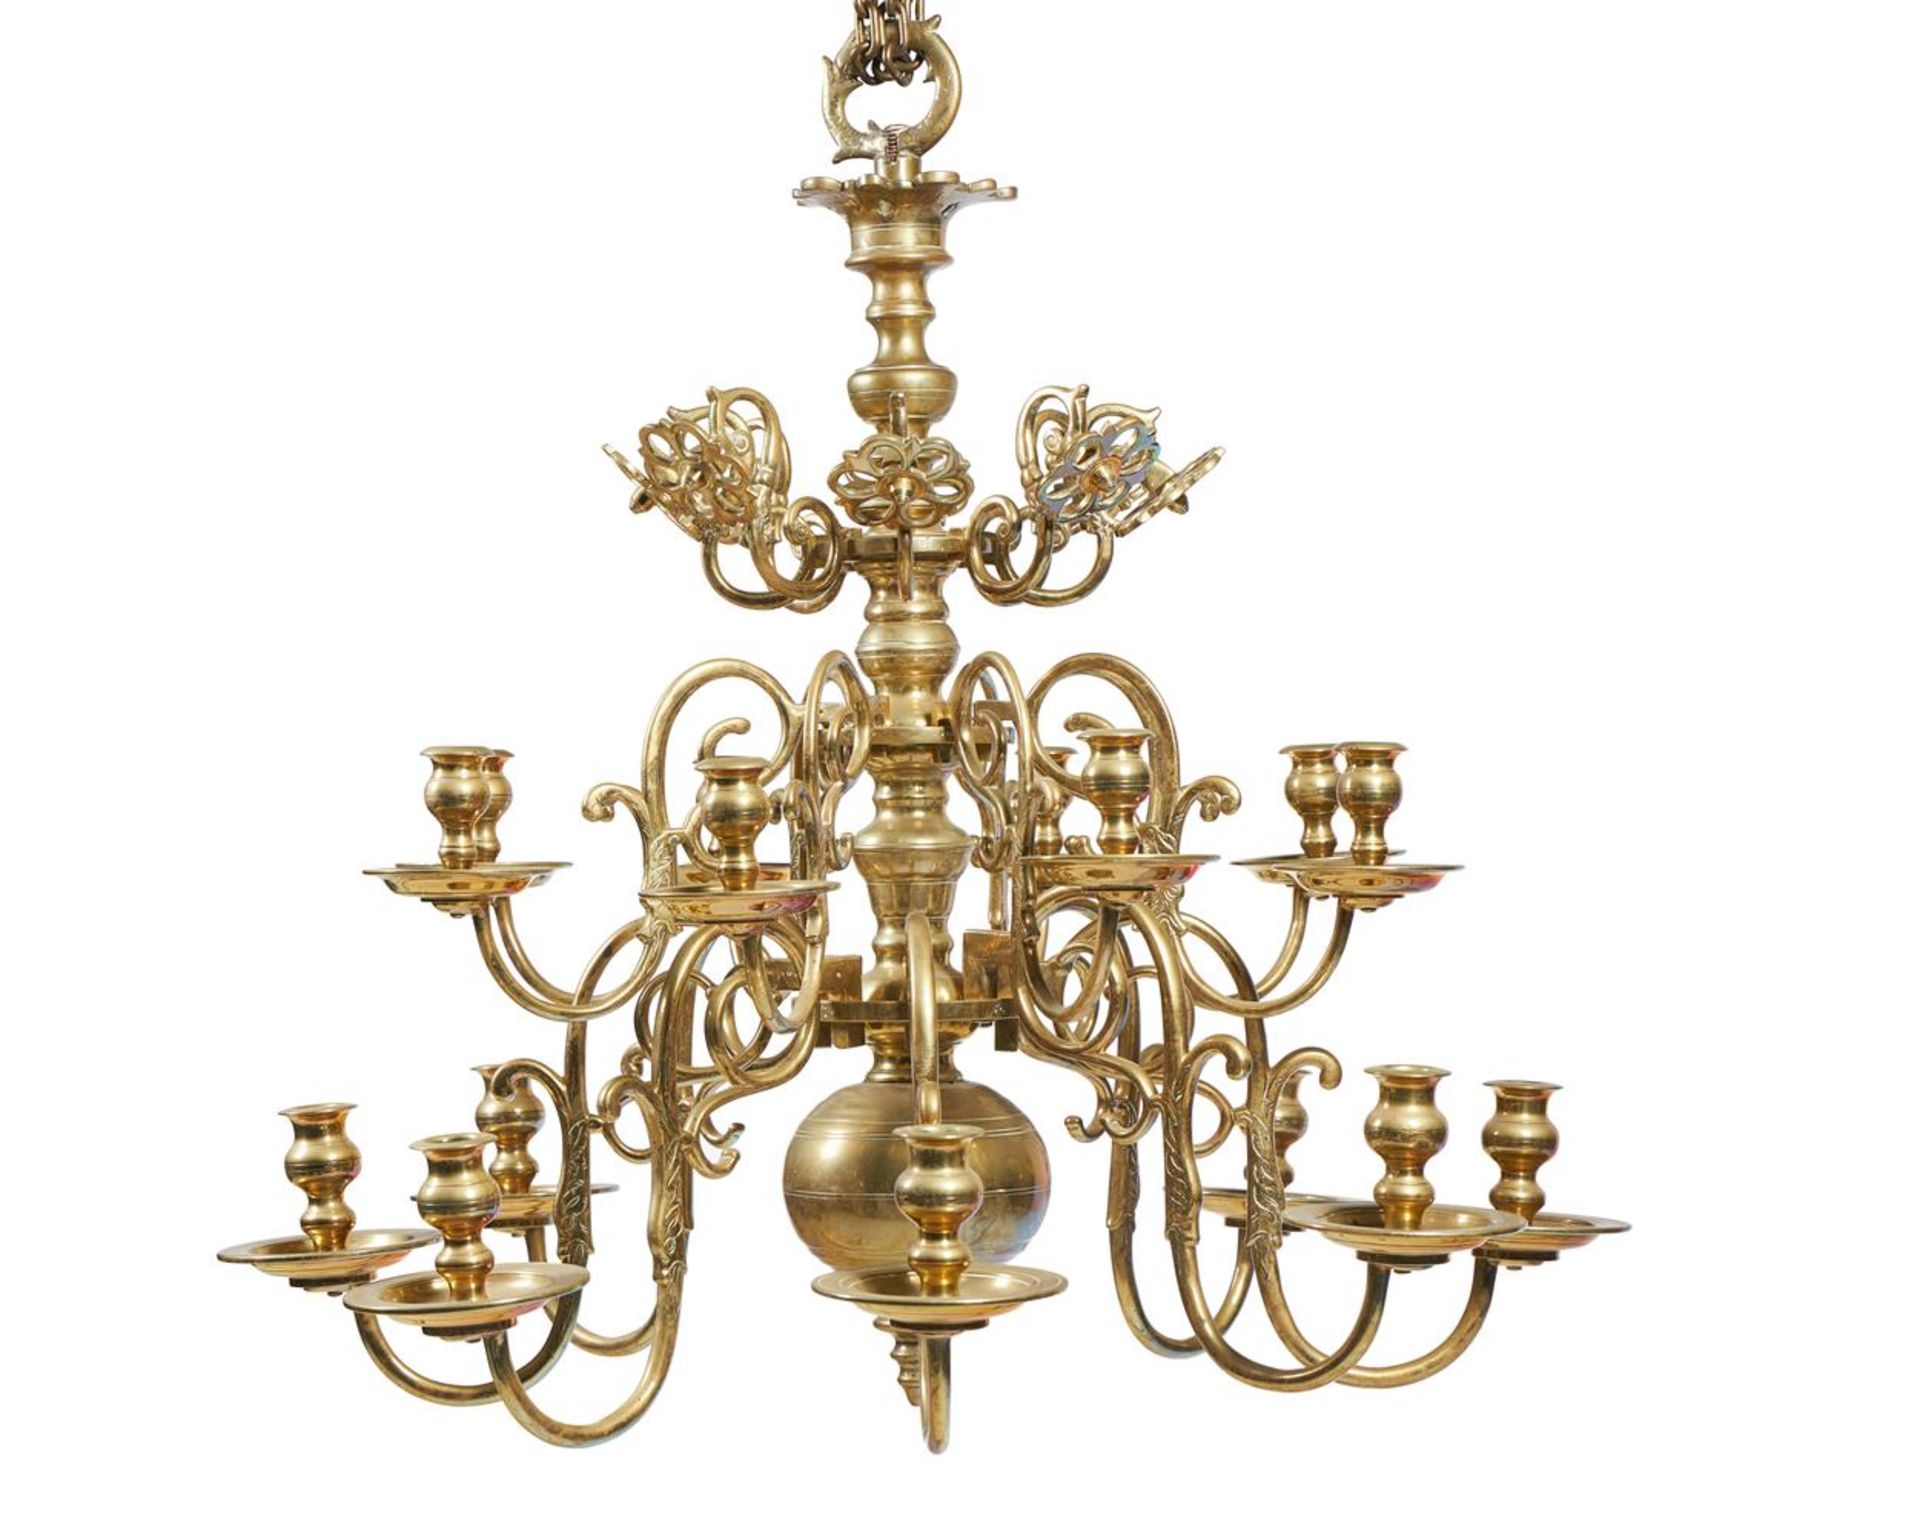 AN ANGLO-DUTCH GILT BRASS SIXTEEN LIGHT CHANDELIER, 18TH/19TH CENTURY - Image 2 of 4